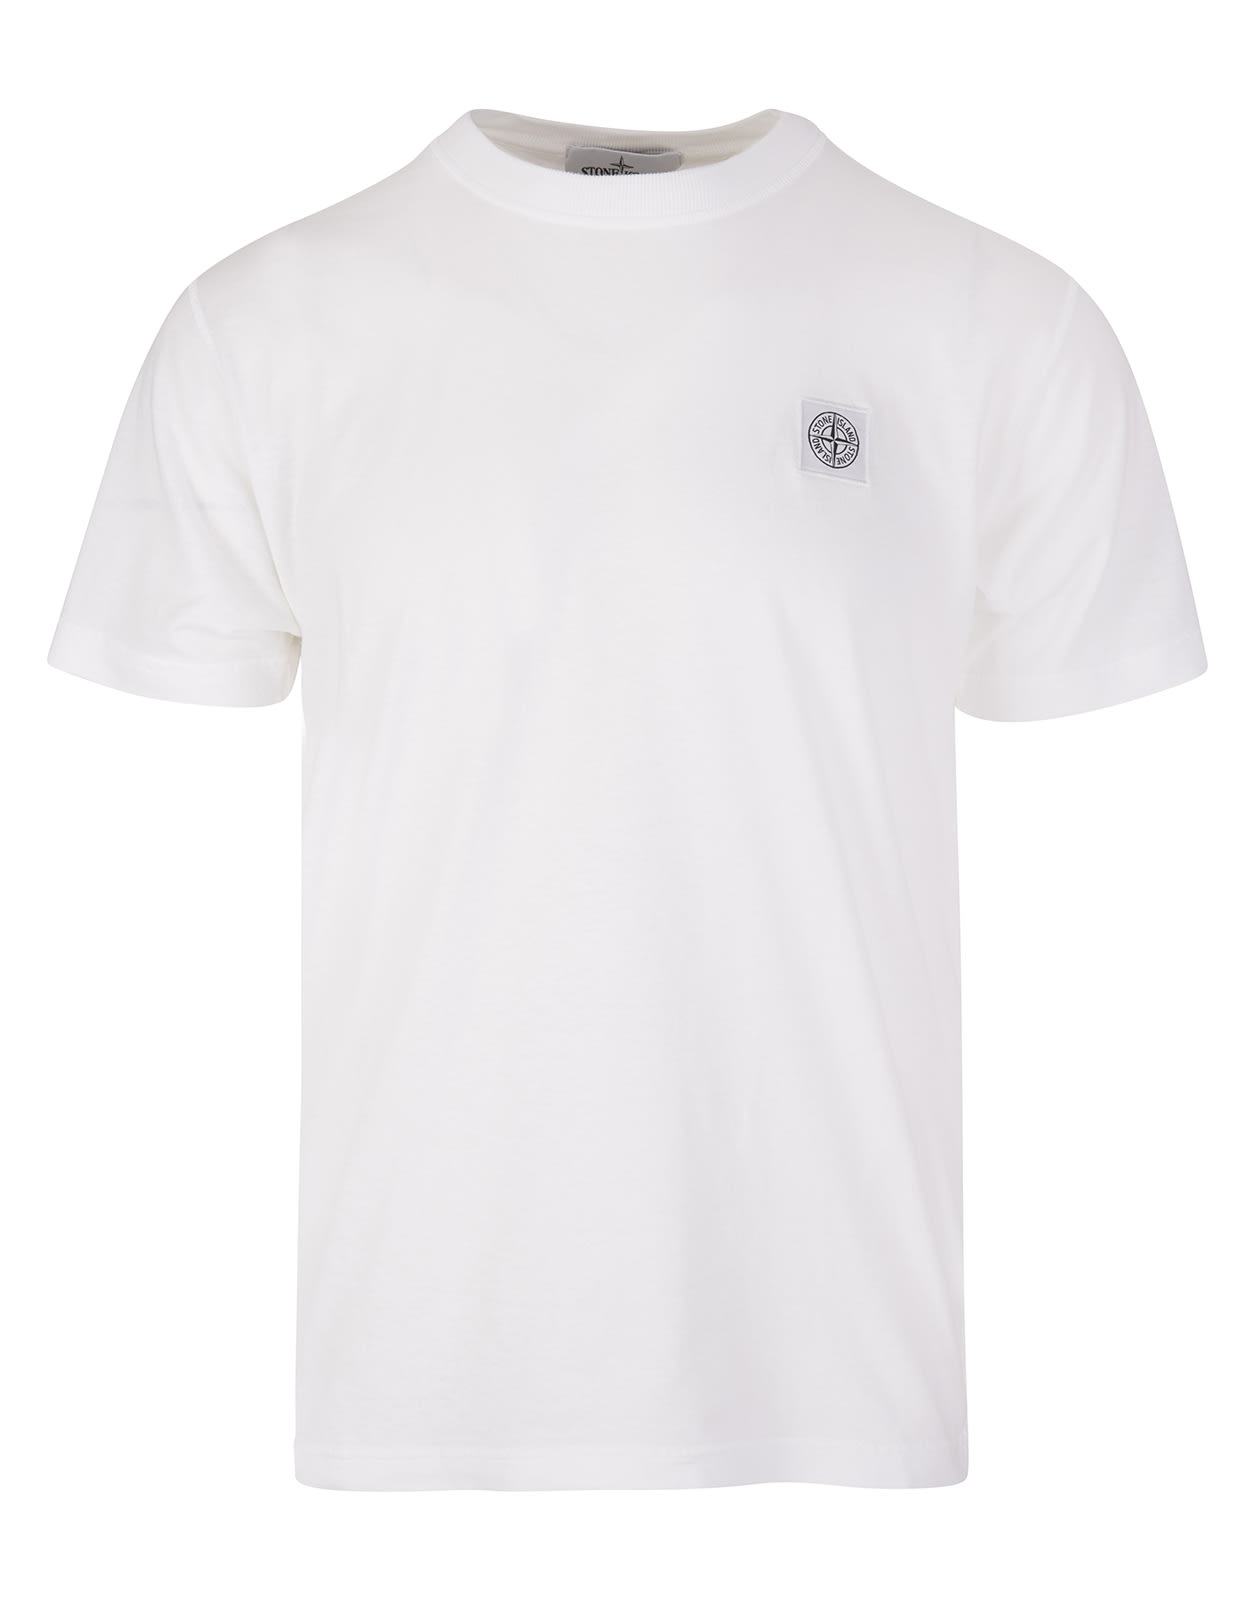 Man Regular Fit White T-shirt With Compass Rose Stone Island Patch